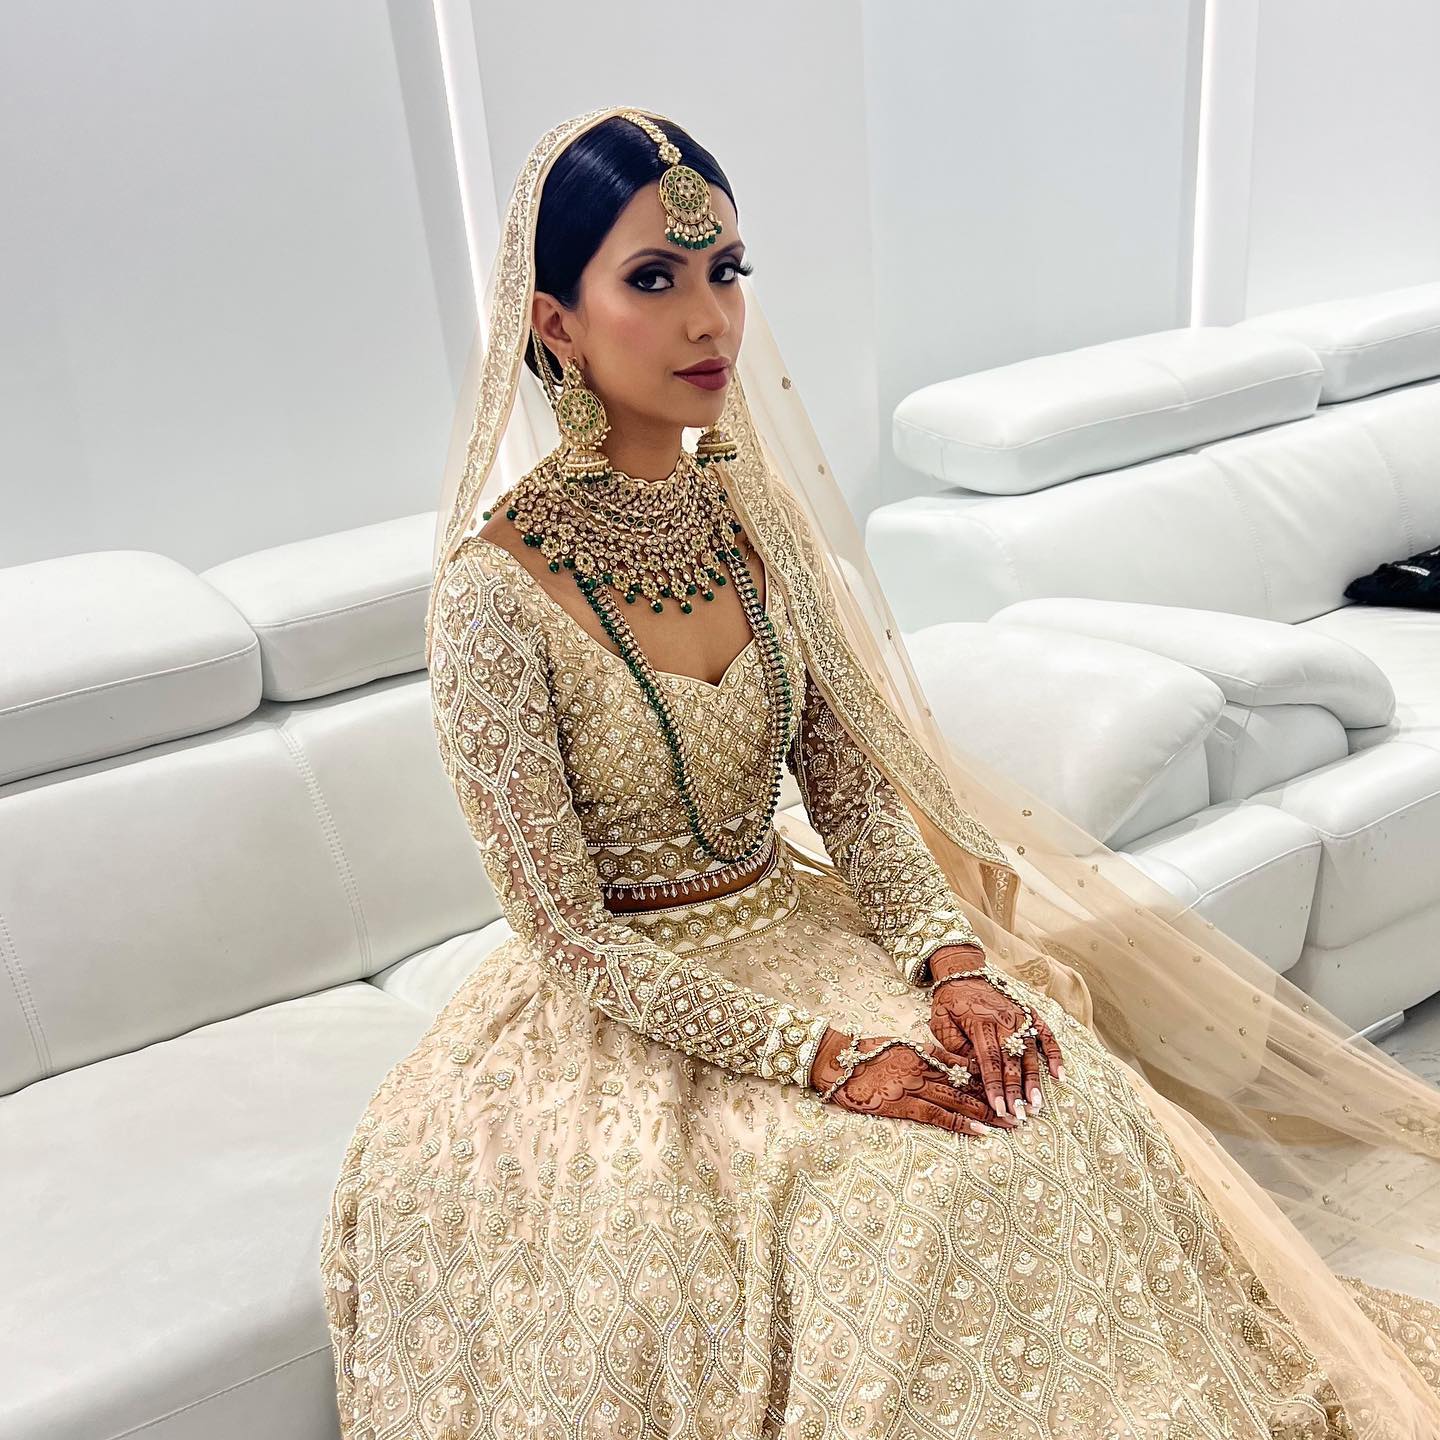 And here’s Trizzalyn’s regal bridal look for her reception/walima! 

💄 Bridal MU and styling by @shellybhandarimakeup 
💇🏻‍♀️ Hair by @nahreng 
💎 Jewellery by @taurshop 
👗 Bridal lehnga by @byelora 
👐🏼 Henna by @hennabymaziah 
📸 Pro photography/videography by @riss_photography_sydney 

———————————————————————————
DM to secure a booking for your big day or special occasion or send an enquiry via the form linked in my bio.
———————————————————————————
❗️1:1 Personal Makeup Lessons Now Available. Enquire via the website in bio for more information.
———————————————————————————
#makeupartistsydney  #sydneymakeupartist #sydneymakeupartists  #100wattskin #sydneymua #sydneybridalmakeup #maccosmetics #fullglam #glammakeup #dewyskin  #toptags #motd #ootd #fullglam #softglam #bride #bridalmakeupartist #mattemakeup #bridalmakeup #nofilter #motd #timelessbridalglam #classicbride #bridalglam #walima #walimabride #sydneybridal #sabyasachibride #indianbride #receptionbride